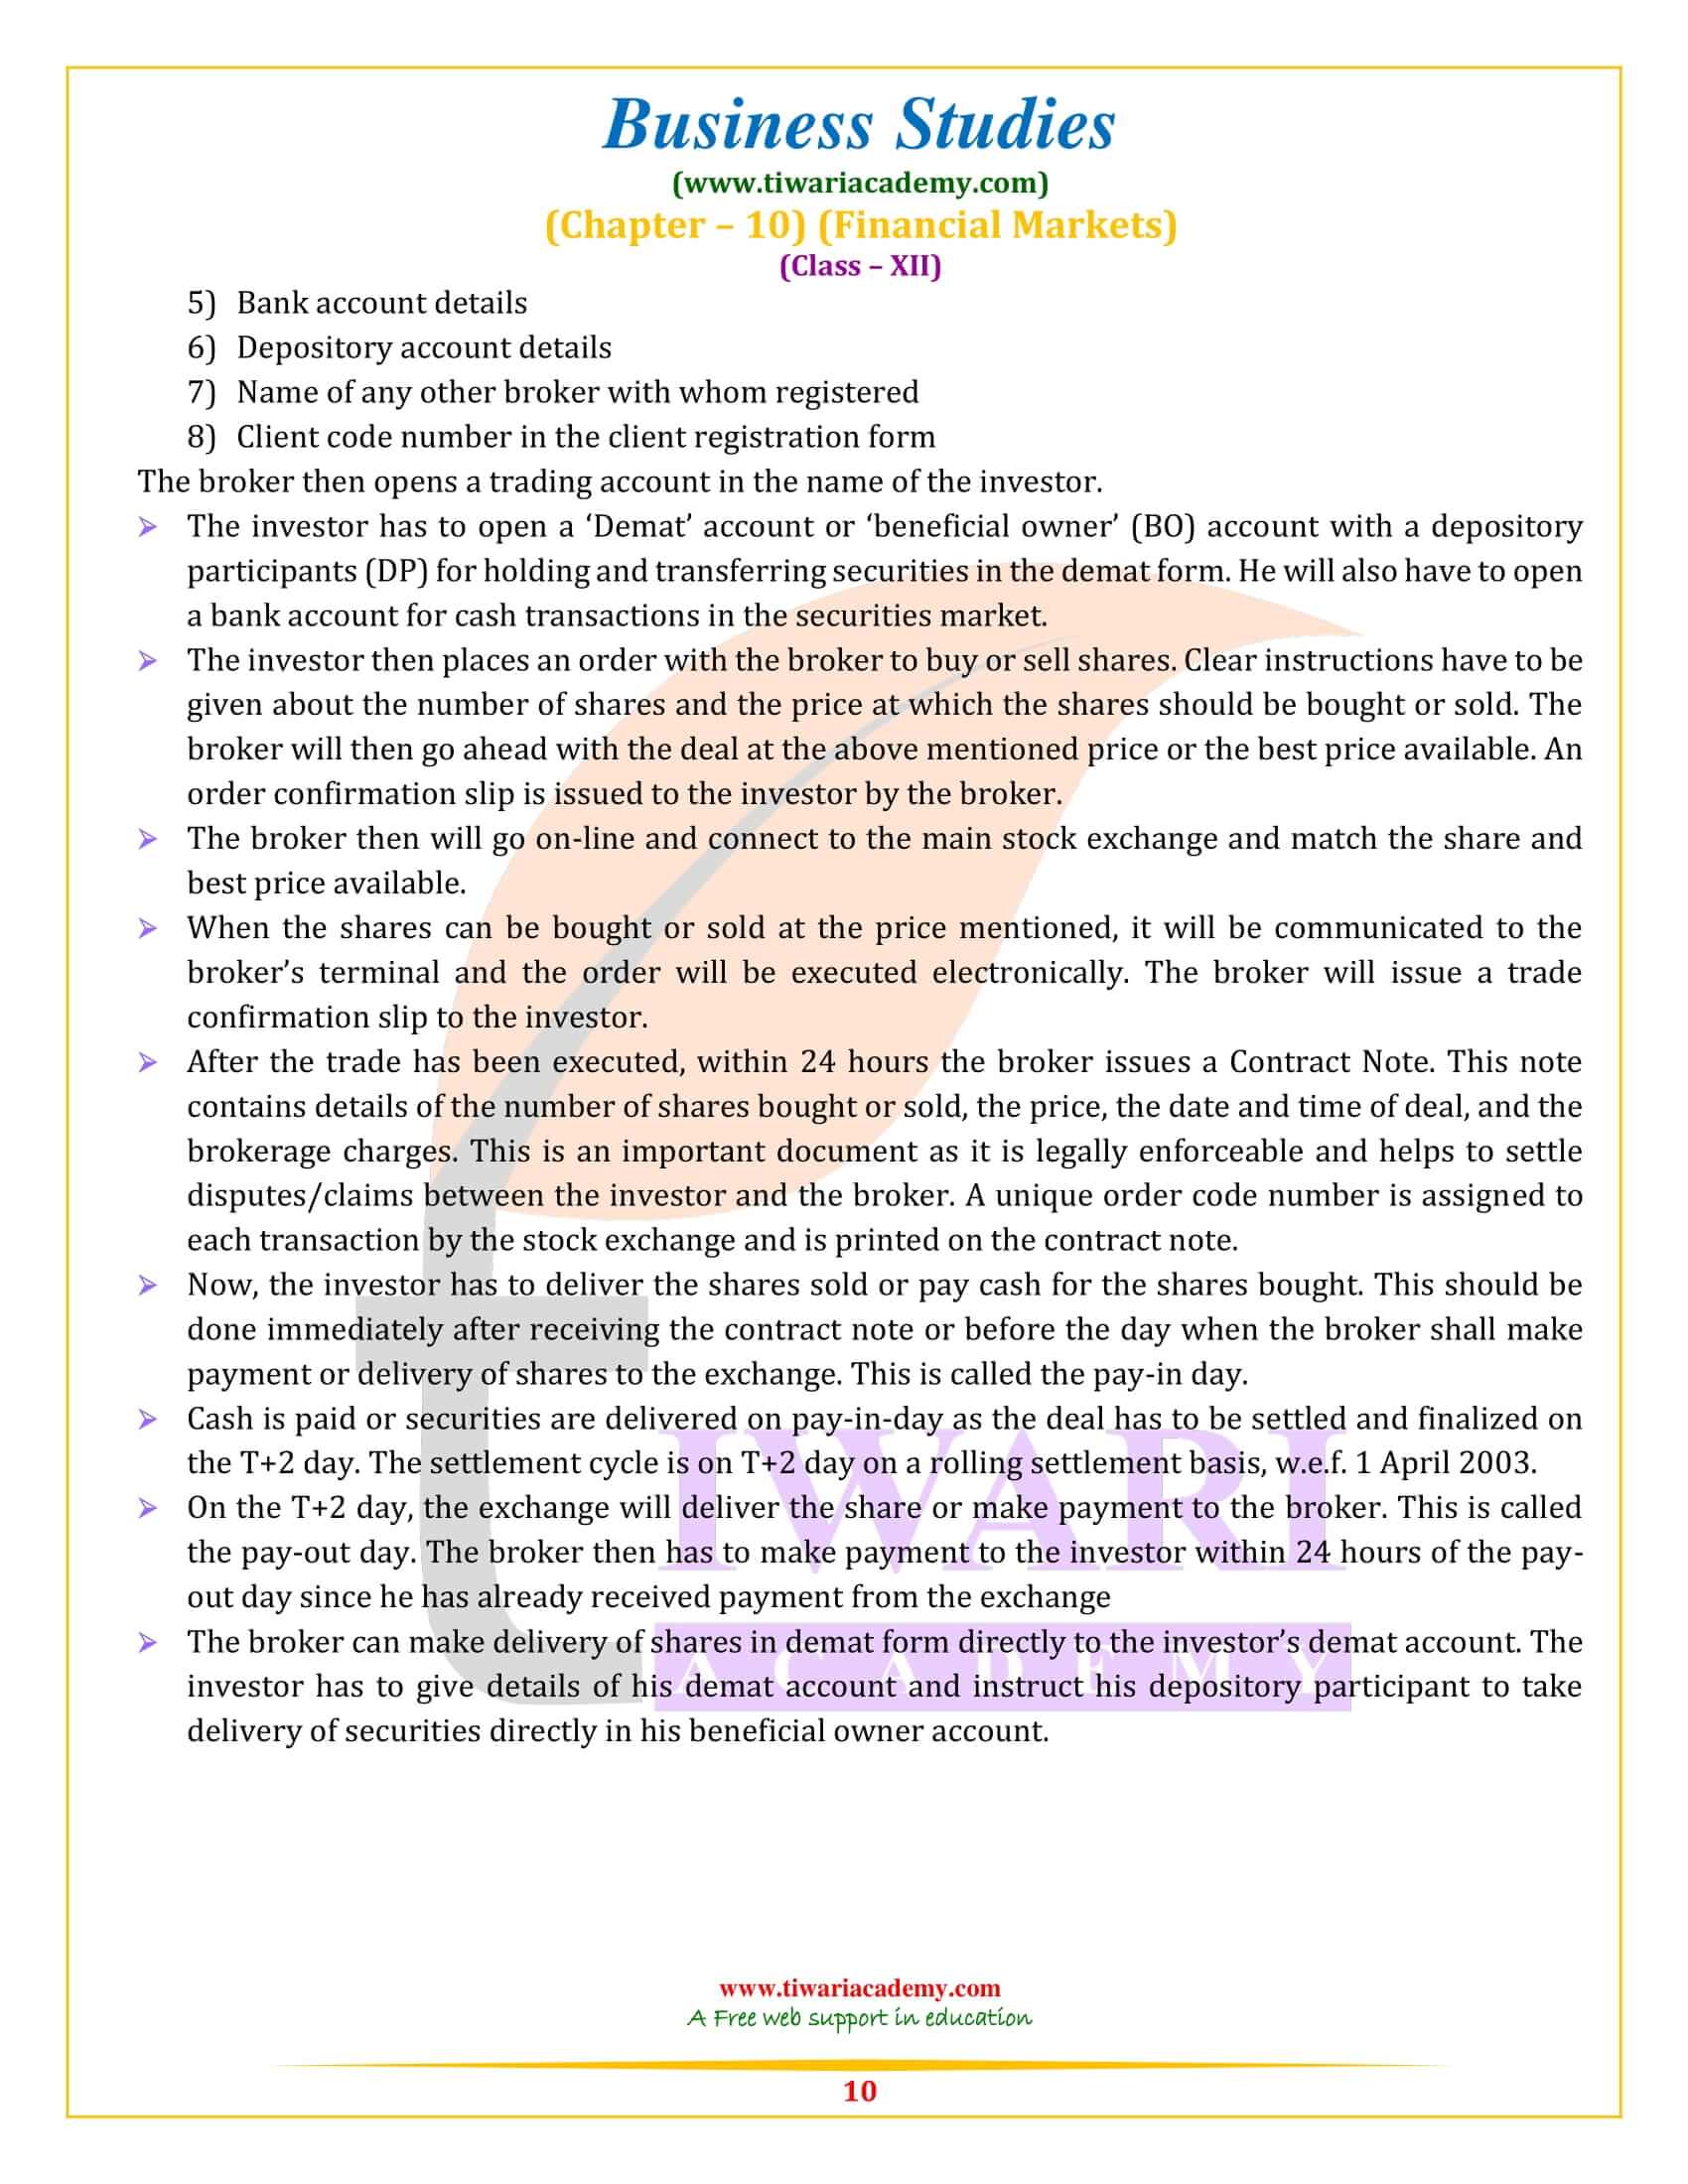 NCERT Solutions for Class 12 Business Studies Chapter 10 long answer type questions